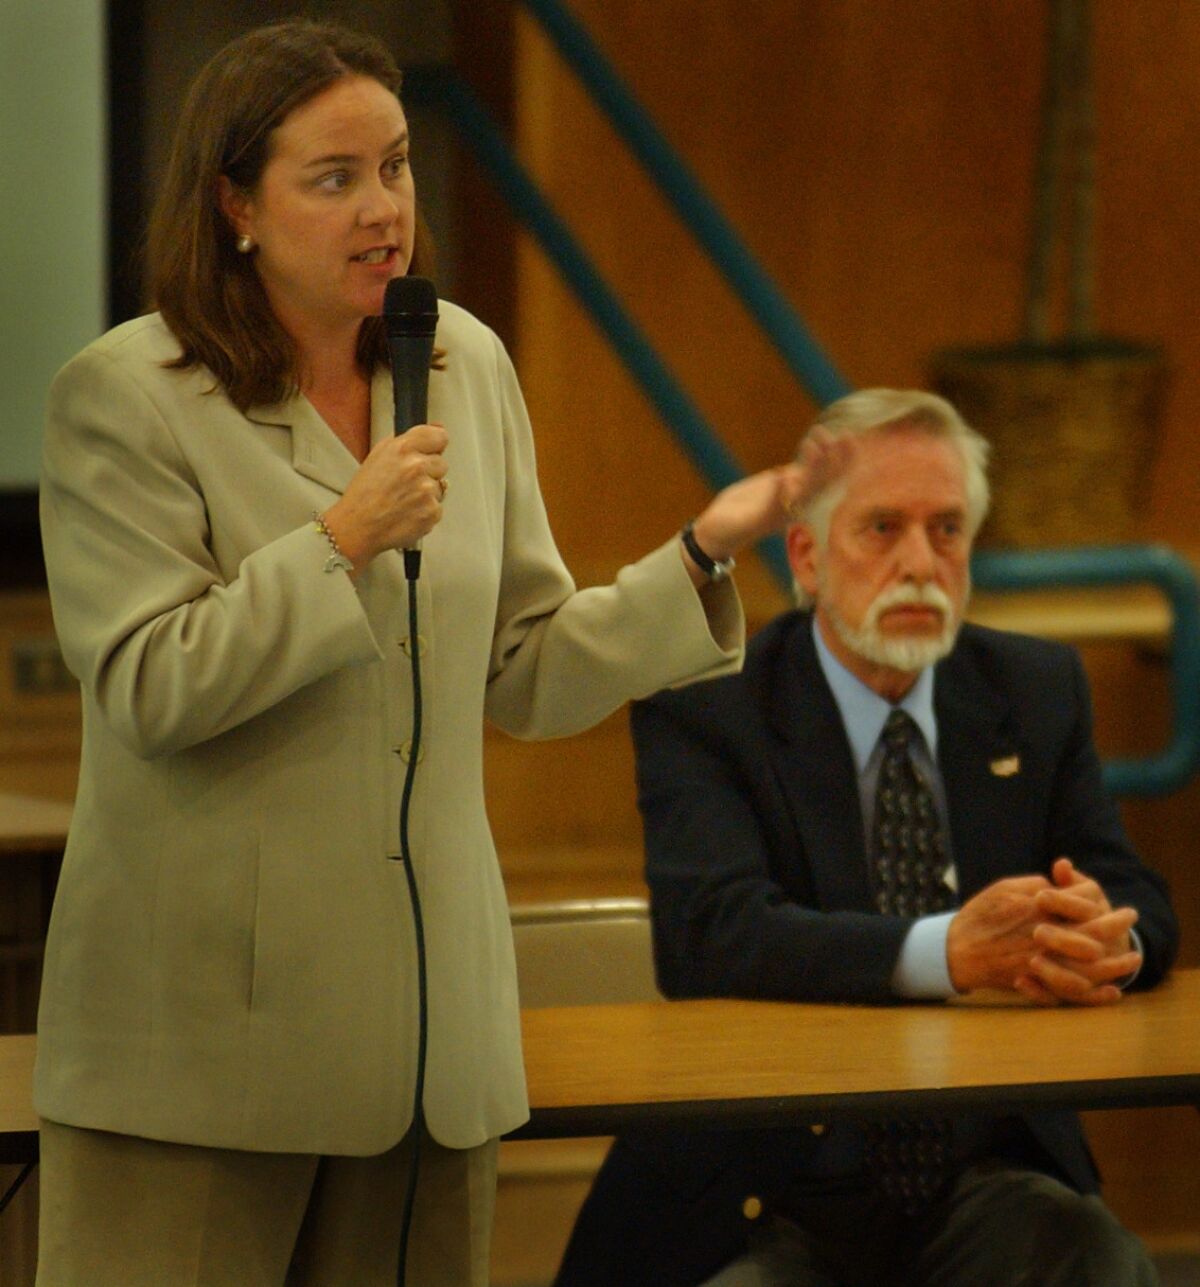 Caprice Young, left, while running for reelection to the Los Angeles Board of Education in 2003. This week, she accepted a job heading Magnolia charter schools.